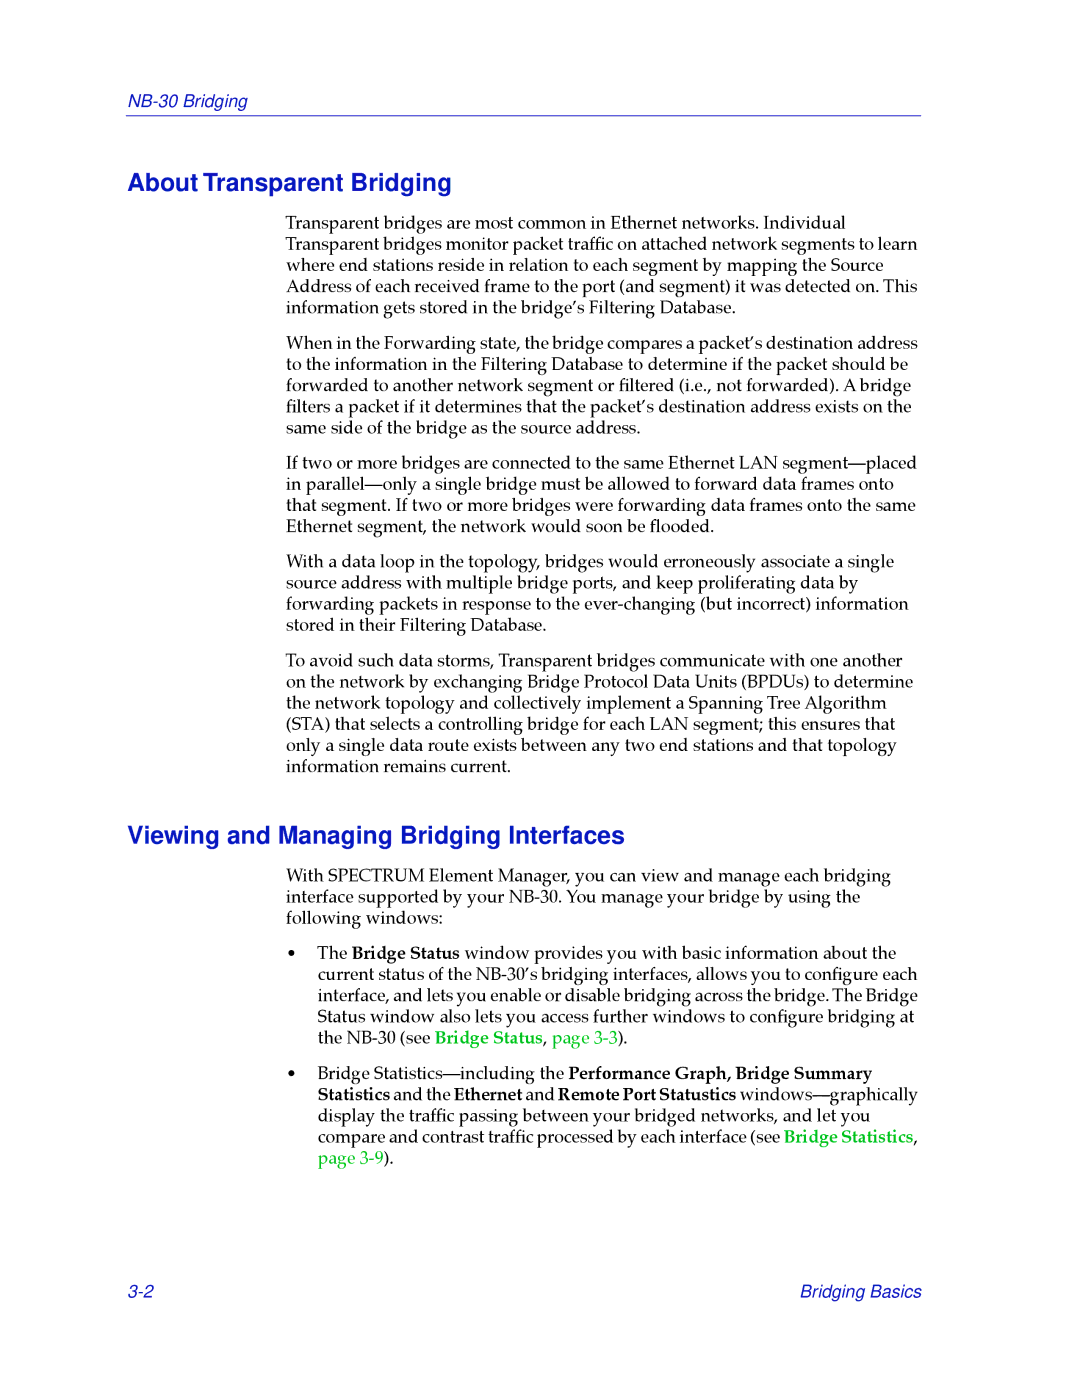 Cabletron Systems NB30 manual About Transparent Bridging, Viewing and Managing Bridging Interfaces 